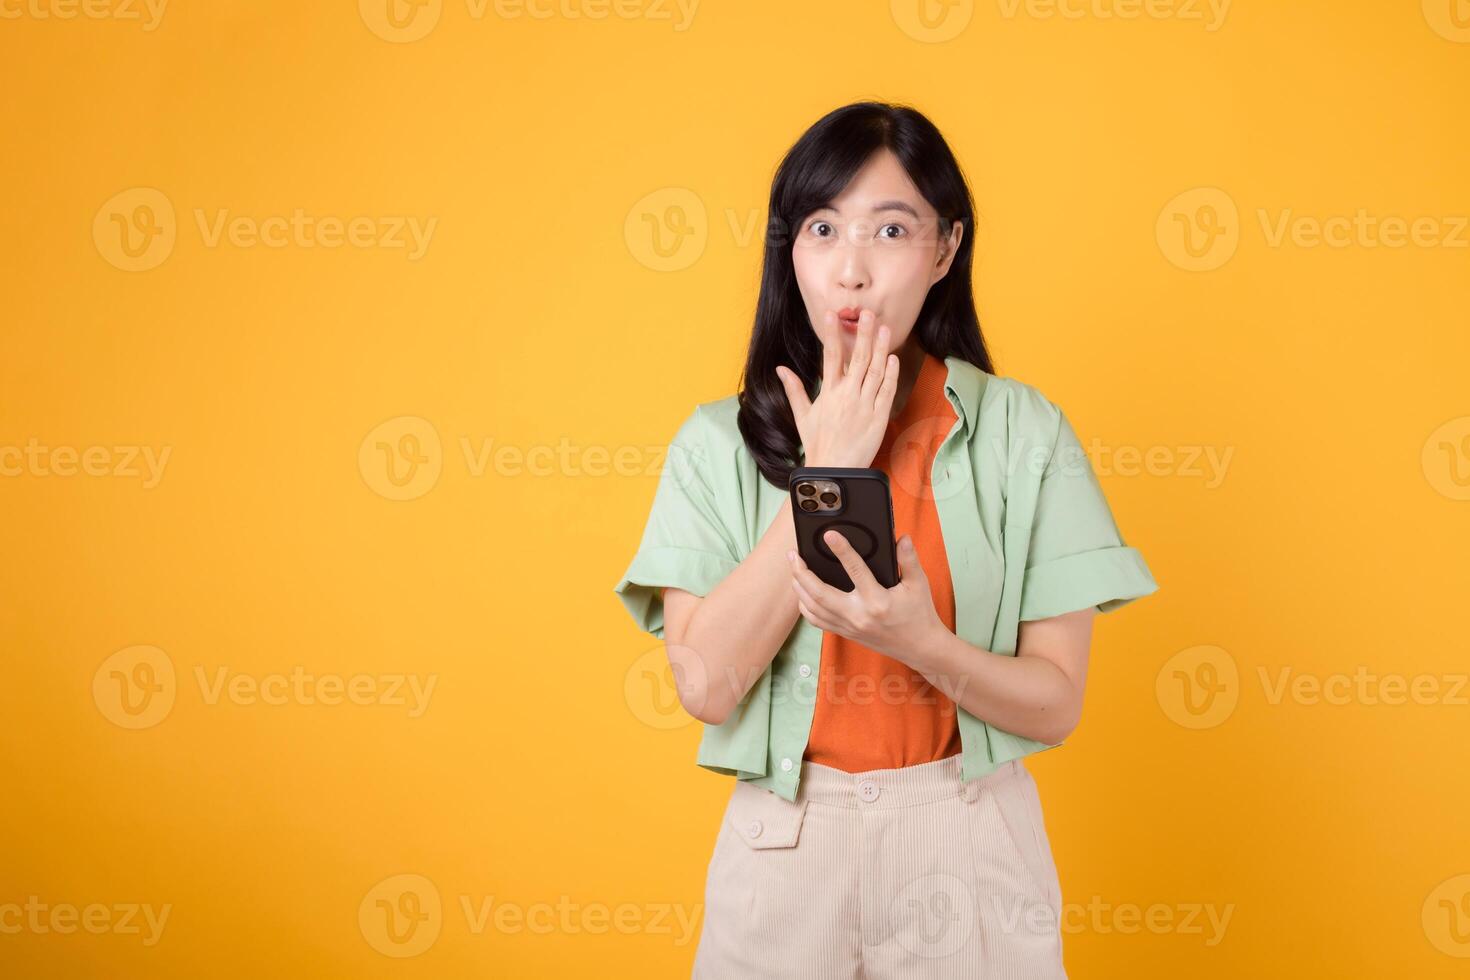 charm of surprise with a cheerful young Asian woman in her 30s, dressed in an orange shirt and green jumper, using her smartphone, mouth closed, on a yellow studio background. App smartphone concept. photo